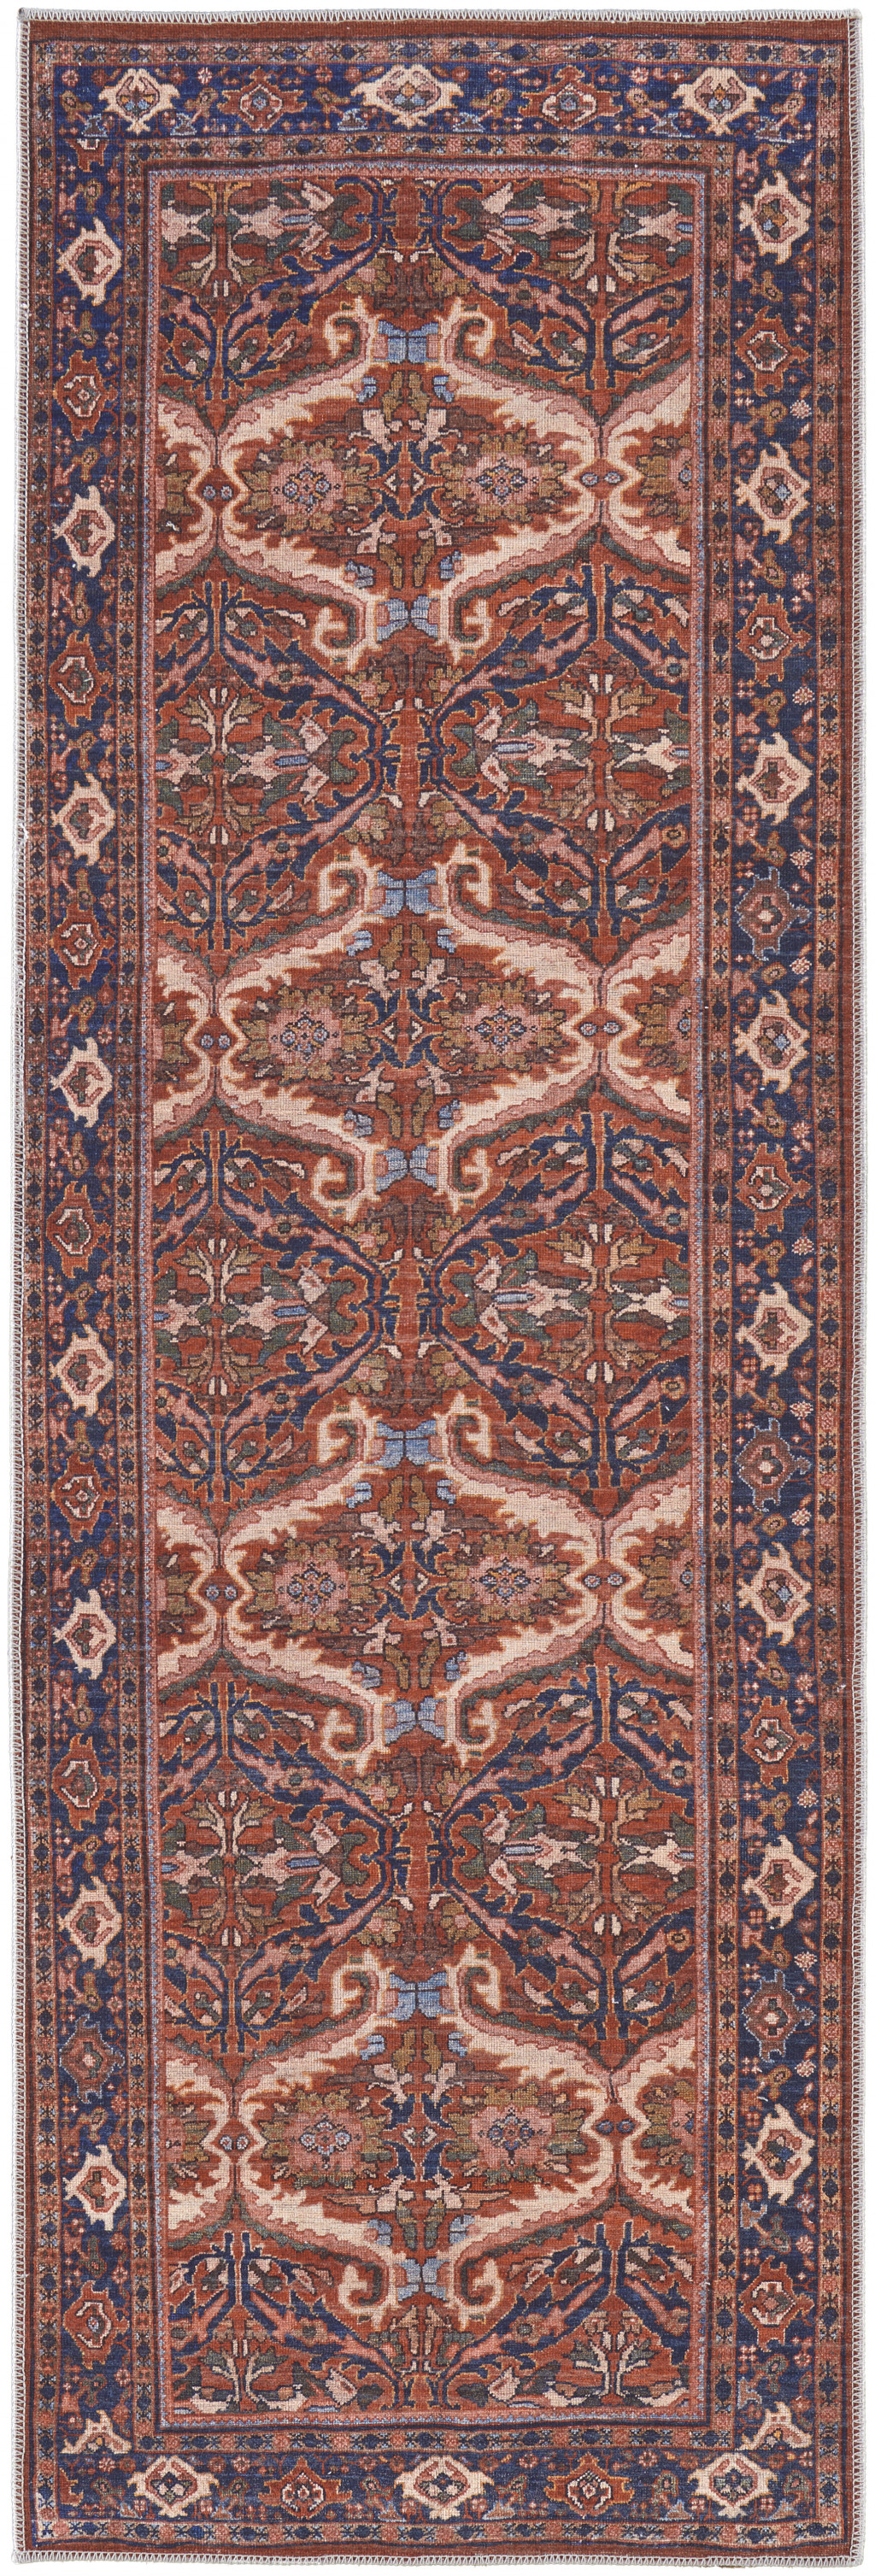 8' Red Tan And Blue Floral Power Loom Runner Rug-515152-1